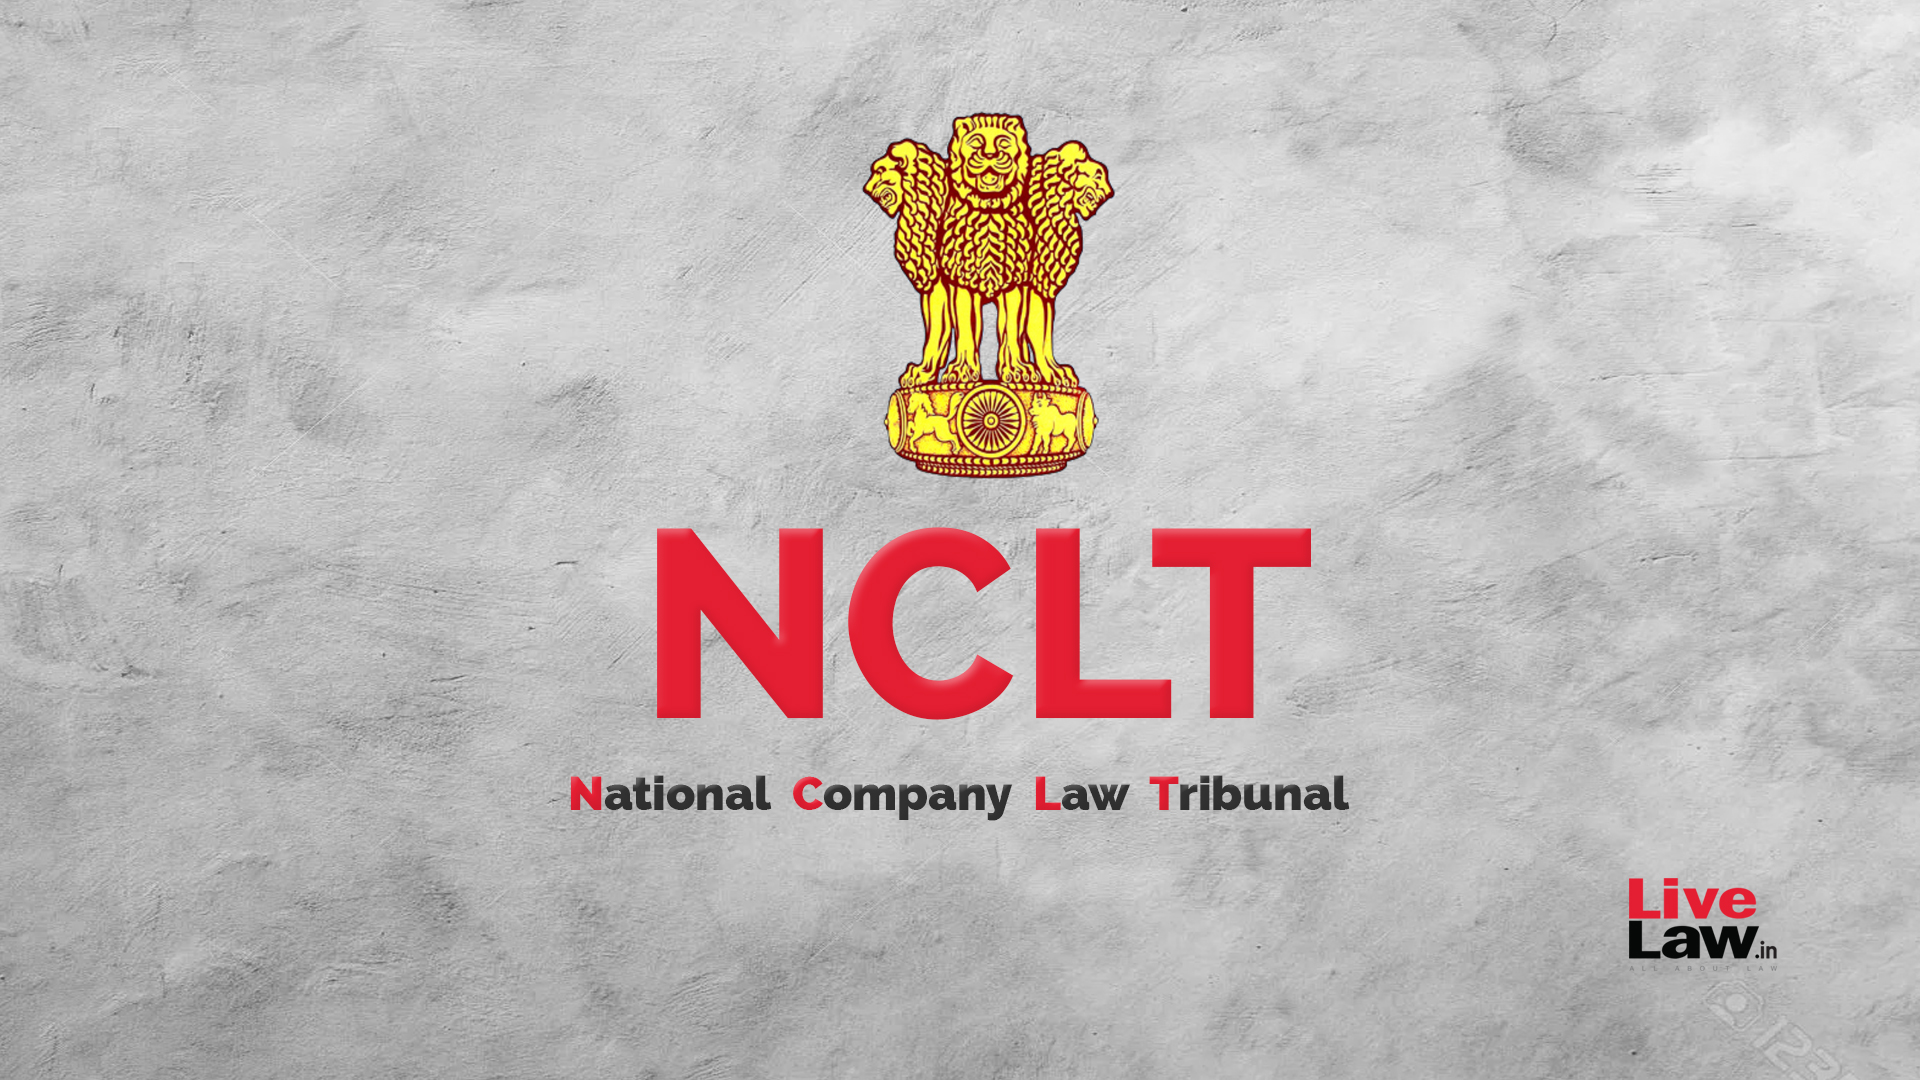 Insufficiency Of Stamp Duty Irrelevant In S. 7 Proceedings Under IBC: NCLT Mumbai Bench